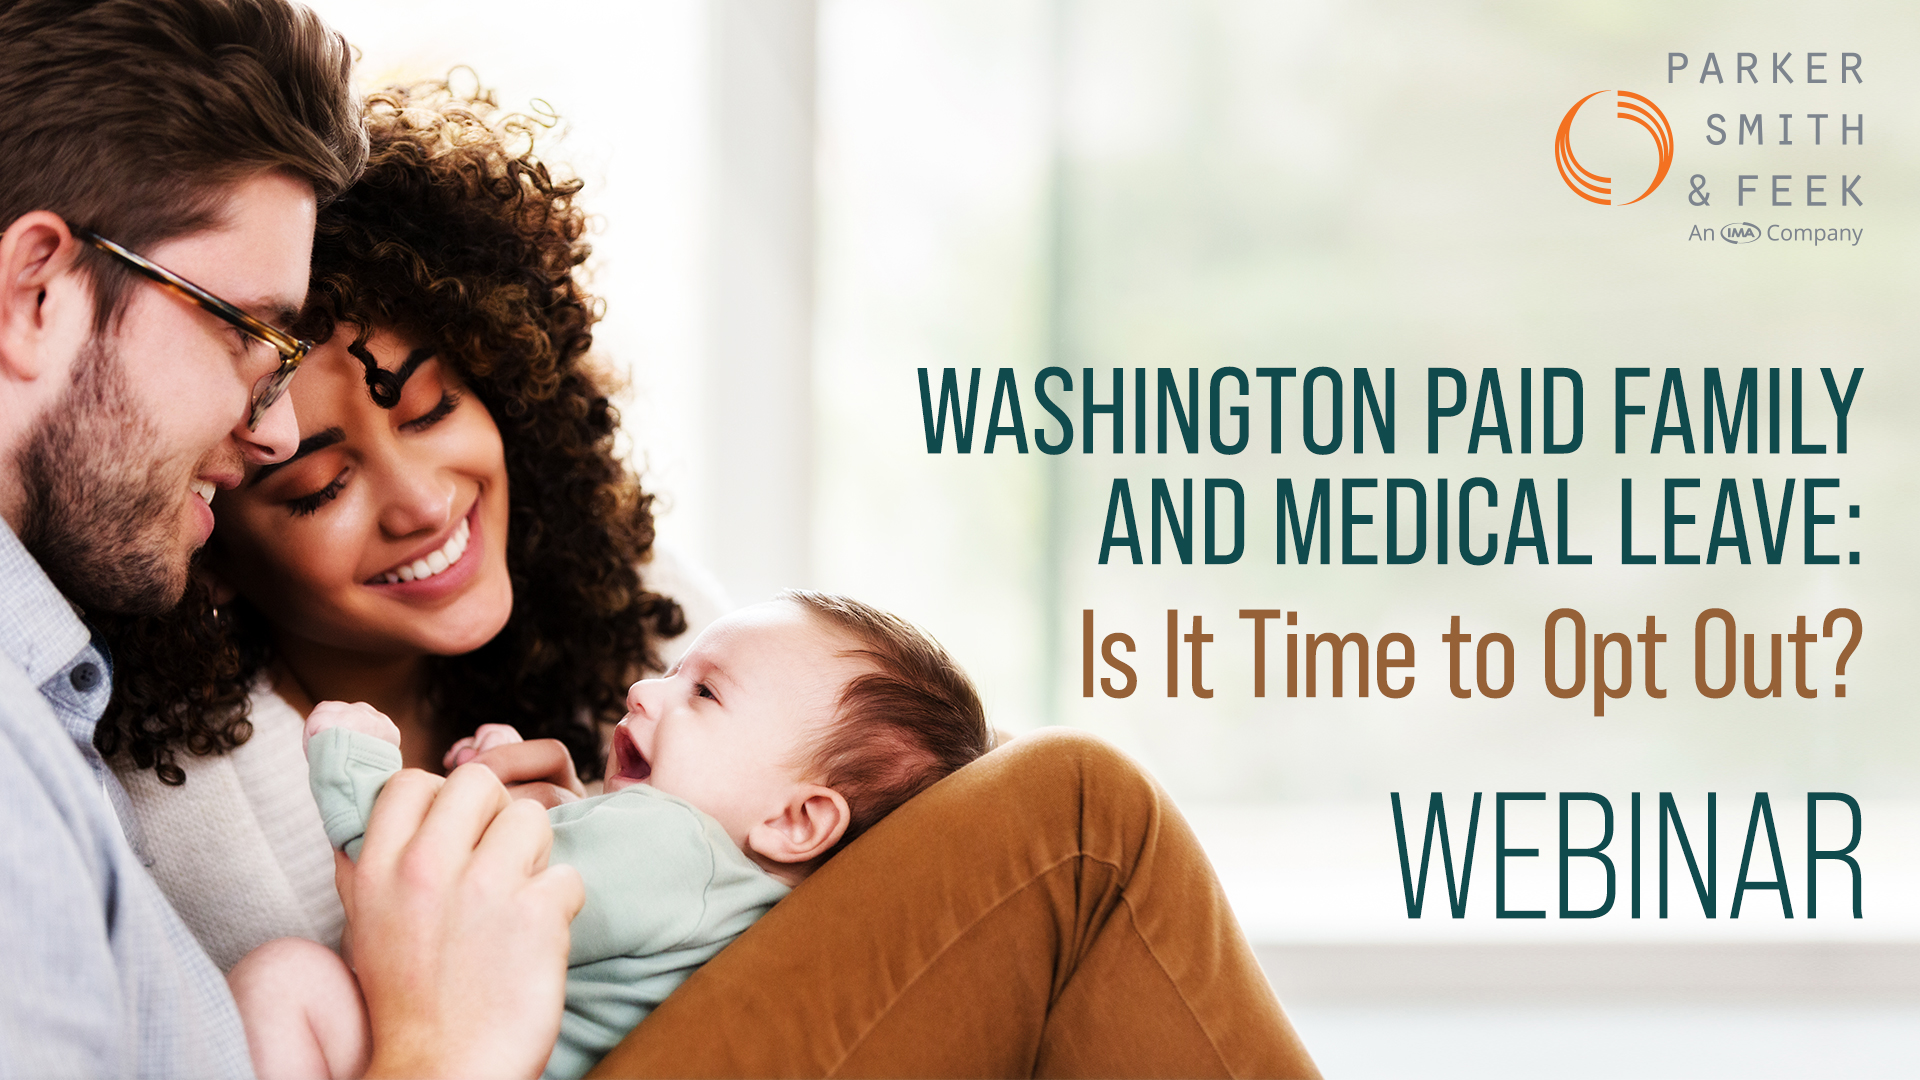 Washington Paid Family and Medical Leave: Is It Time to Opt Out?